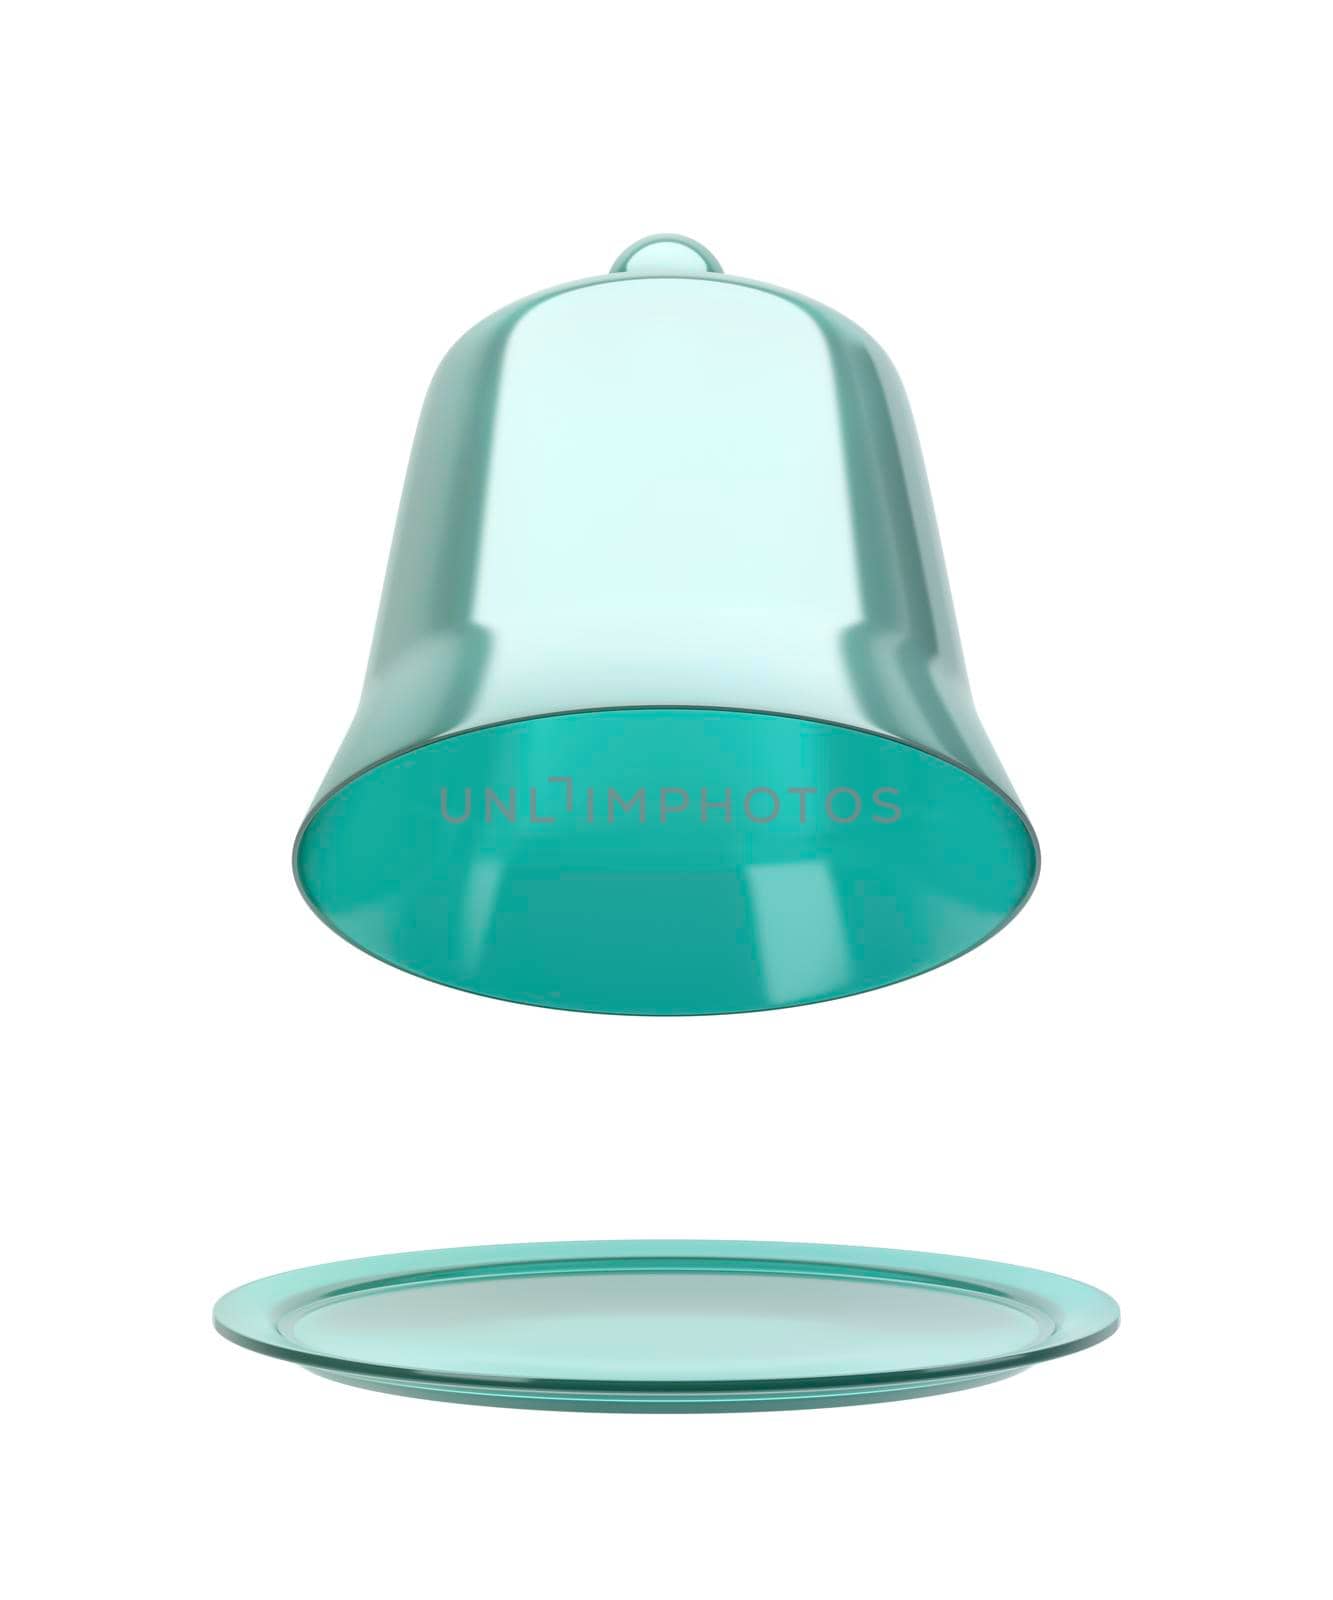 Glass cloche on white background by magraphics